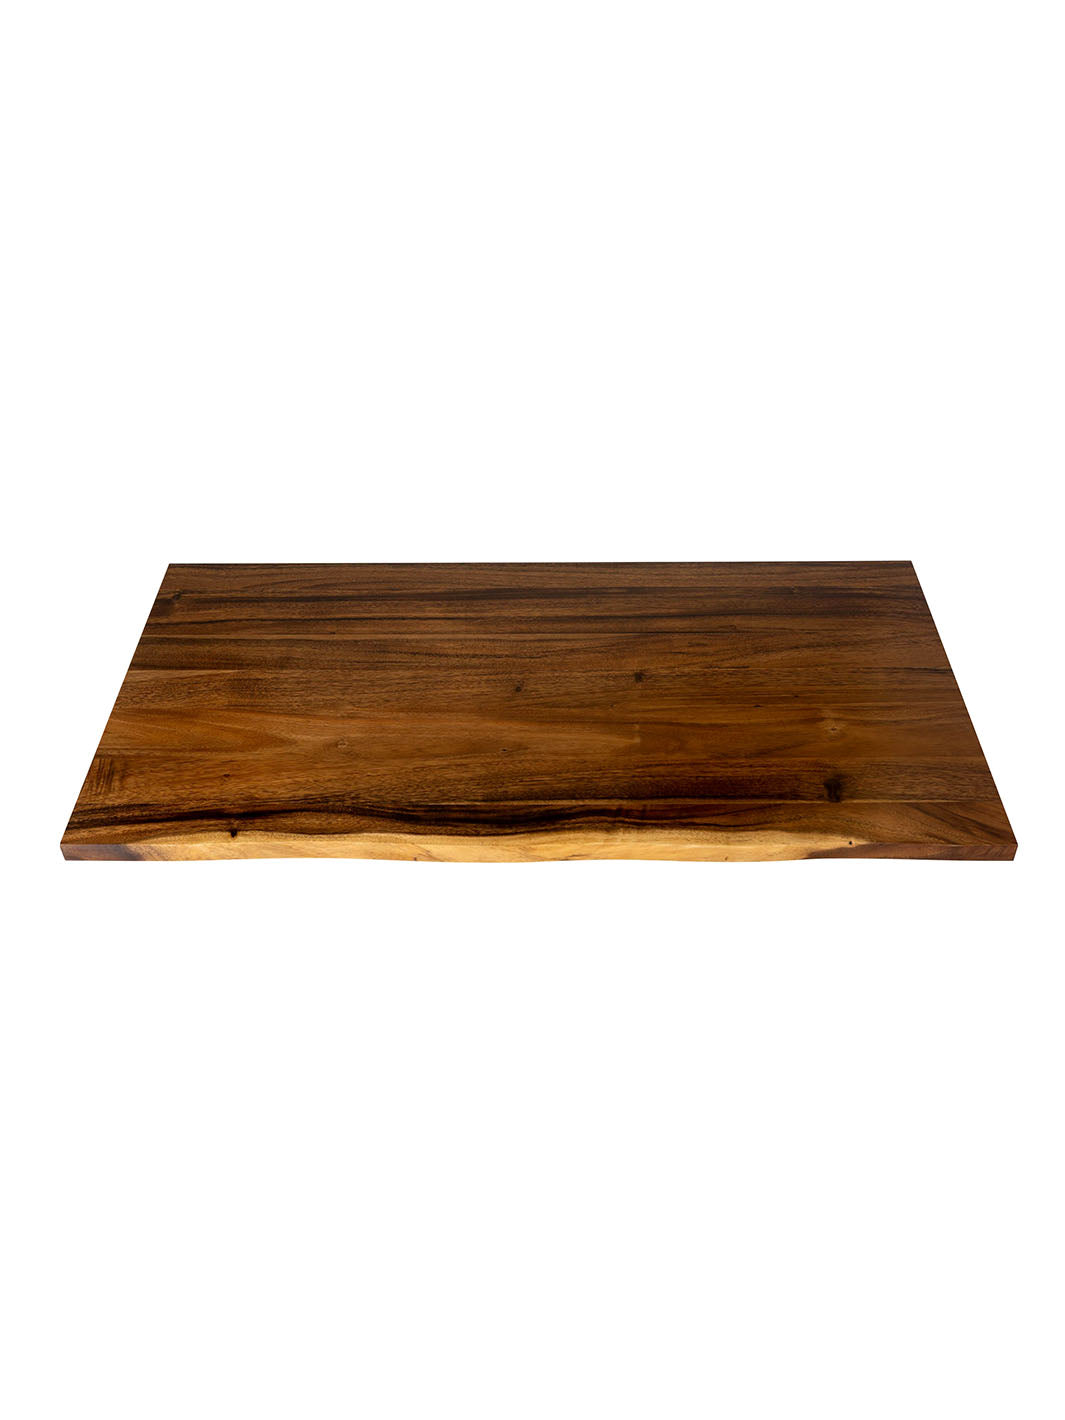 Universal South American Walnut Wood Top for Desk or Table